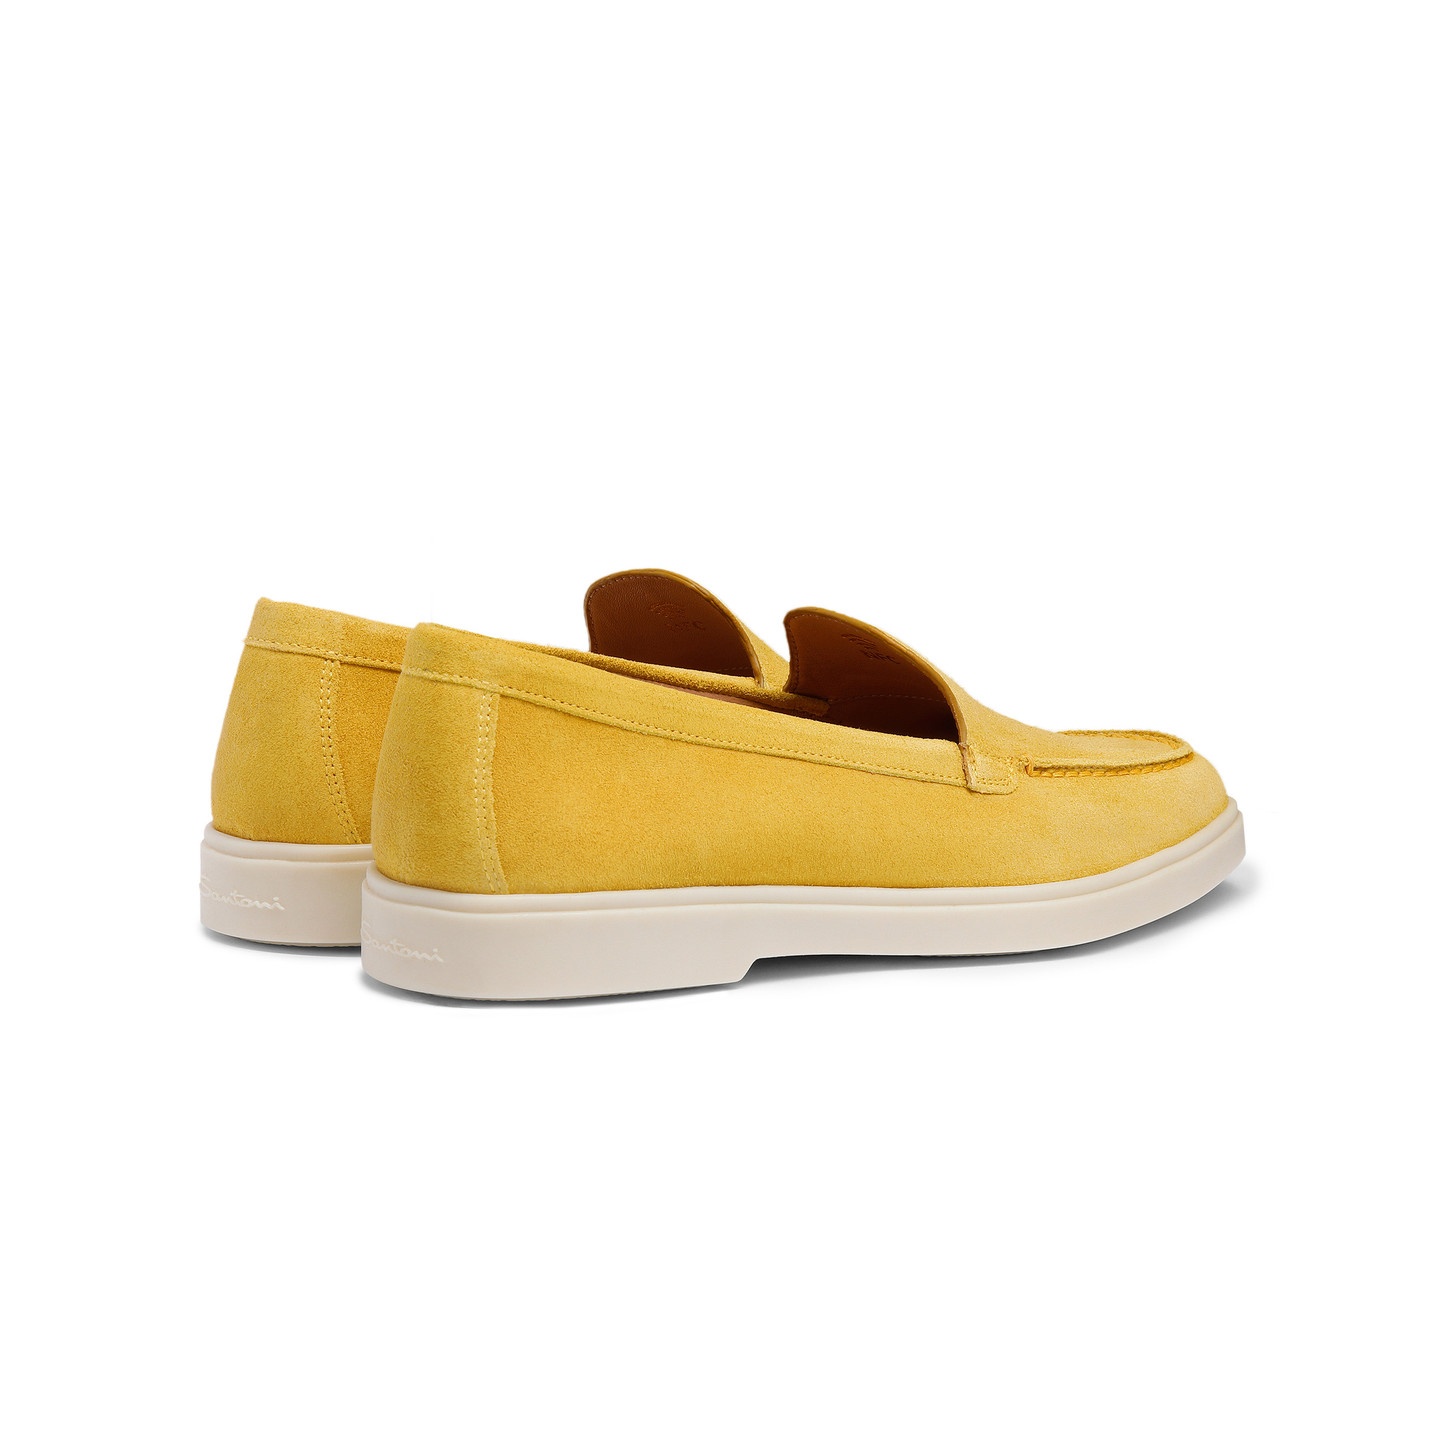 Women's yellow suede loafer - 4